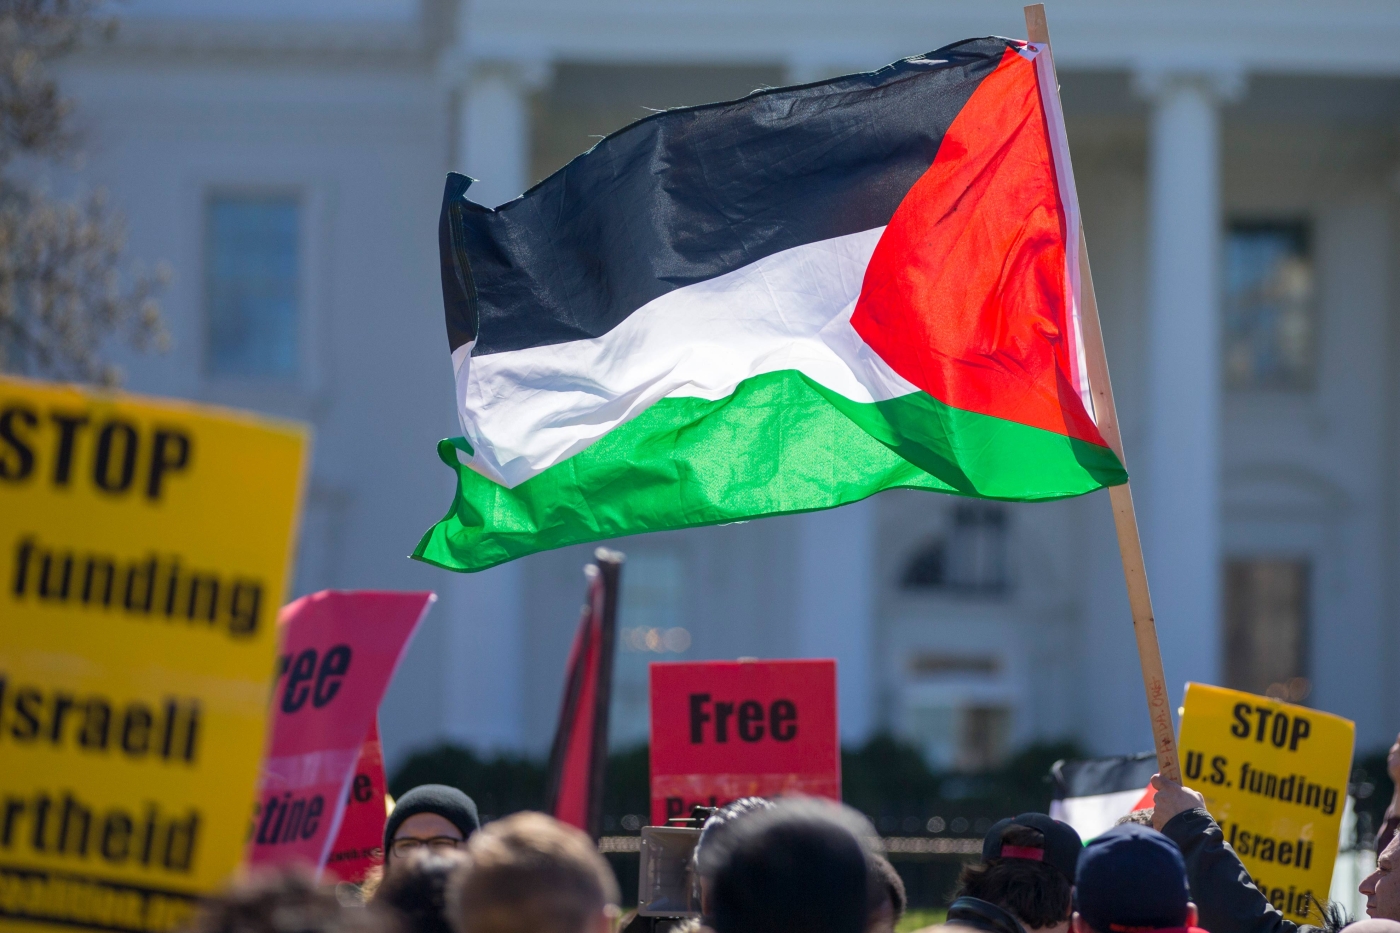 Demonstrators call for an independent Palestinian state during a protest held outside the White House in Washington in 2018.